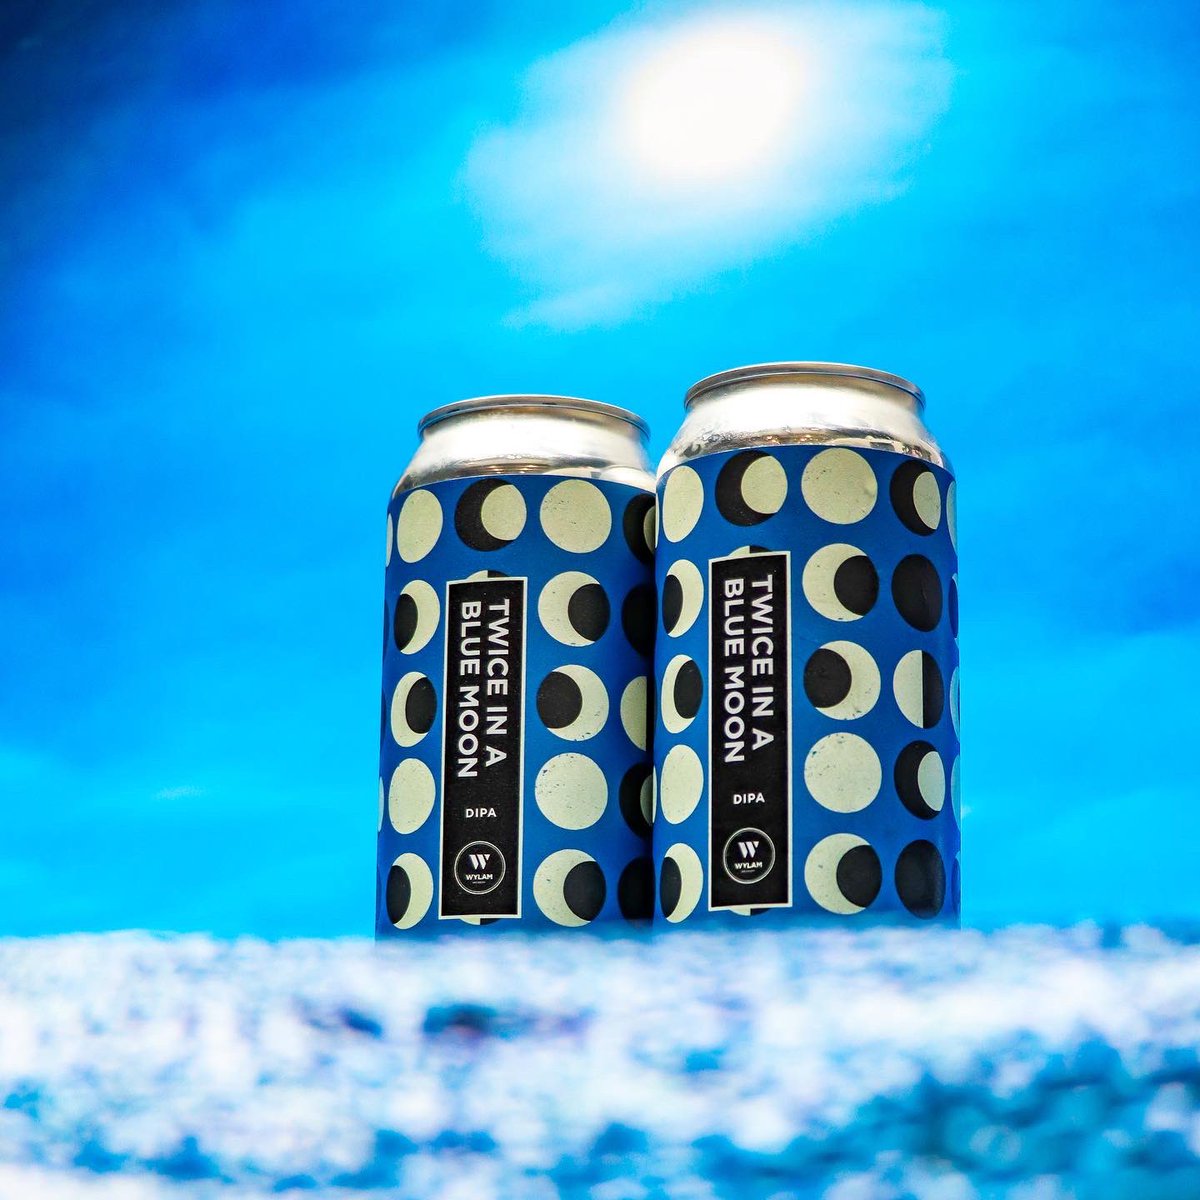 TWICE IN A BLUE MOON DIPA 8.2% Our DIPAs are like buses, police officers & blue moons, they come in twos & you have to wait a long time for them. After Greenbutt Revenges incredible popularity we've cranked up the DIPA engines to drop this one-off brew x beerstore.wylambrewery.co.uk